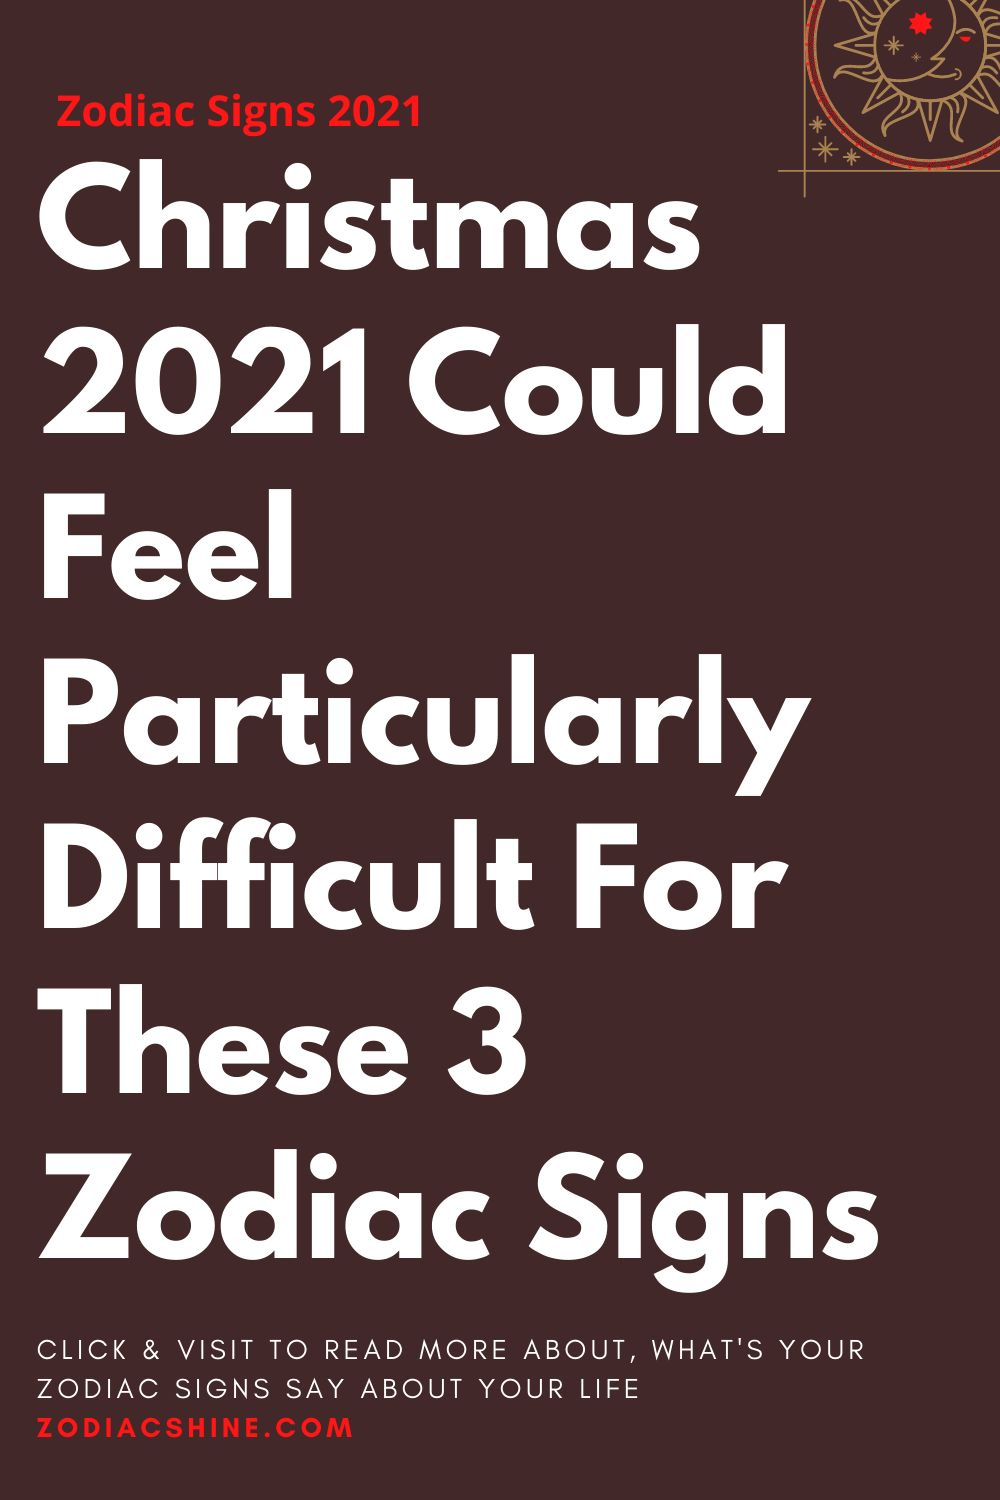 Christmas 2021 Could Feel Particularly Difficult For These 3 Zodiac Signs